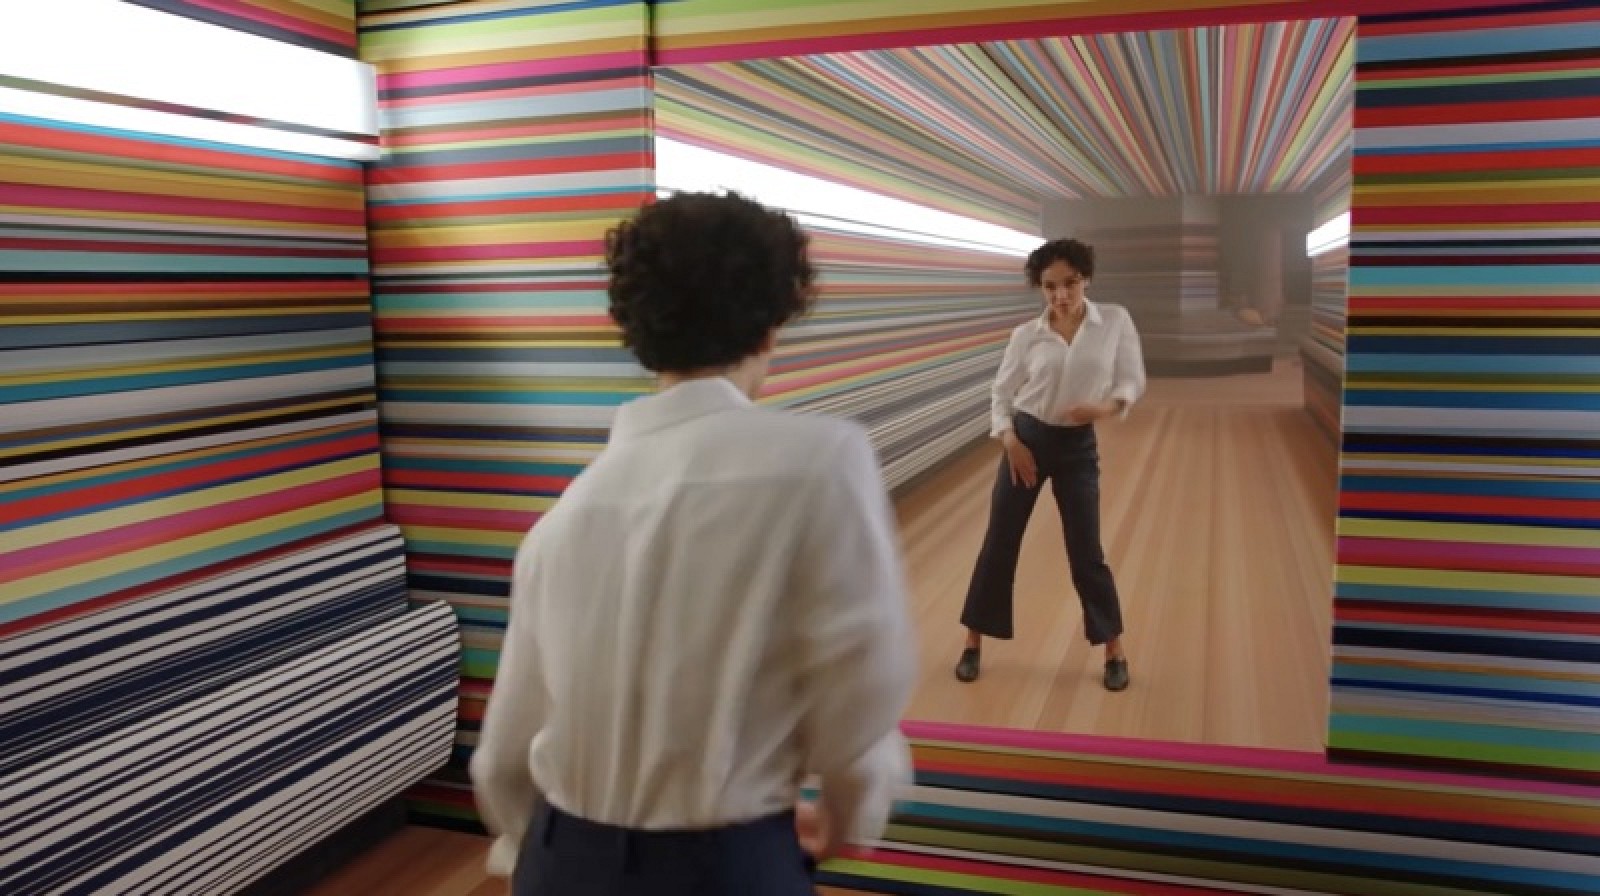 Lead Creative Best Known for Spike Jonze HomePod Video Leaves Apple's Ad Agency